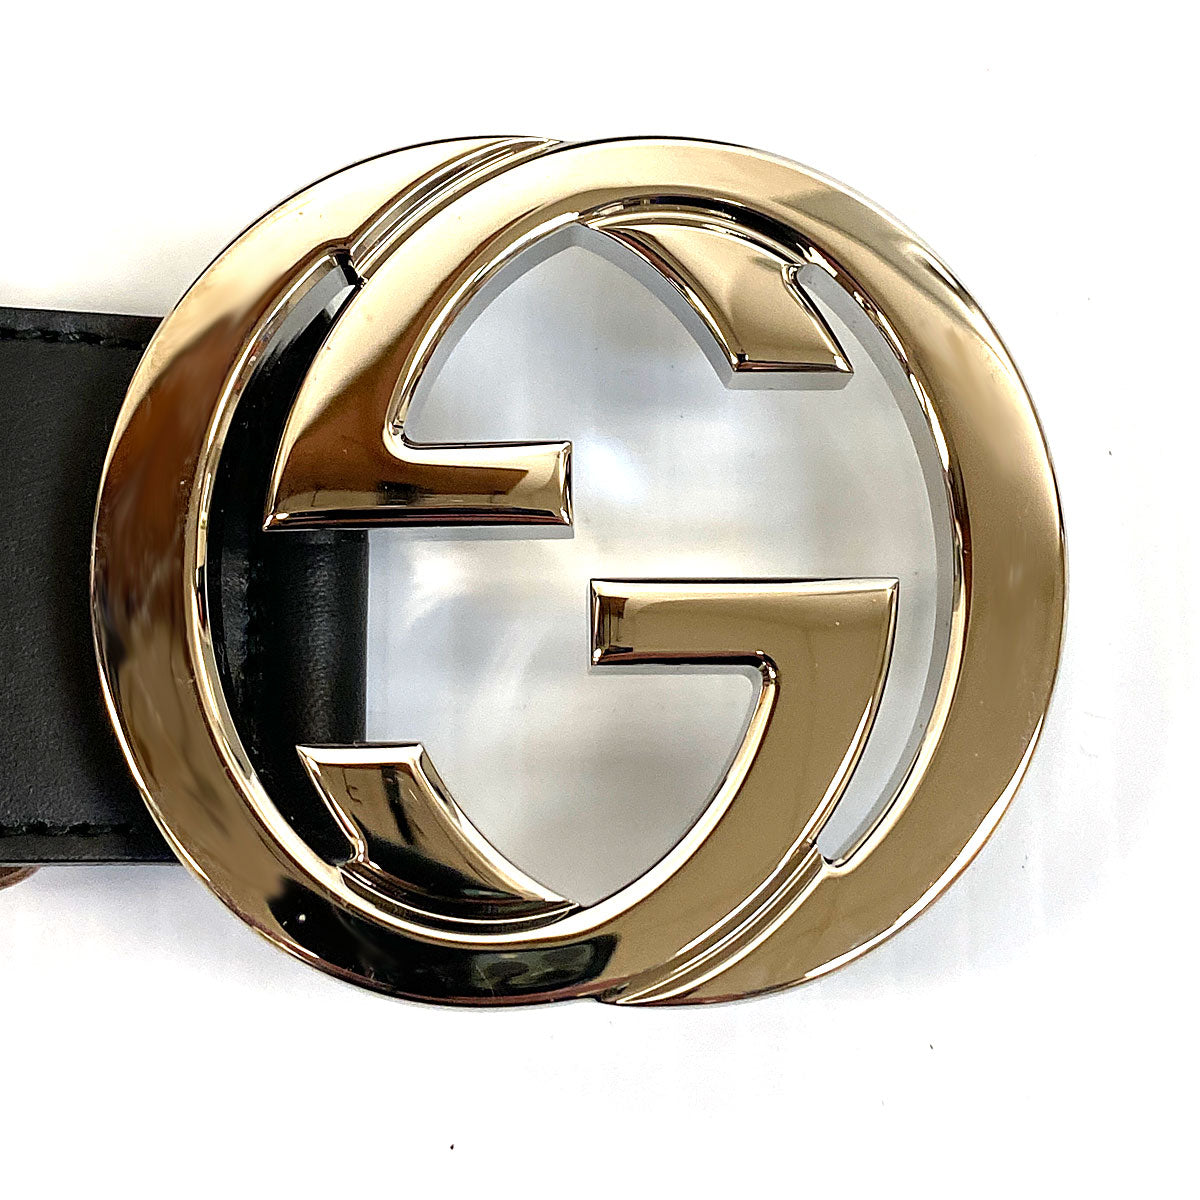 Gucci Green & Red Web Belt with G Buckle – Chicago Pawners & Jewelers